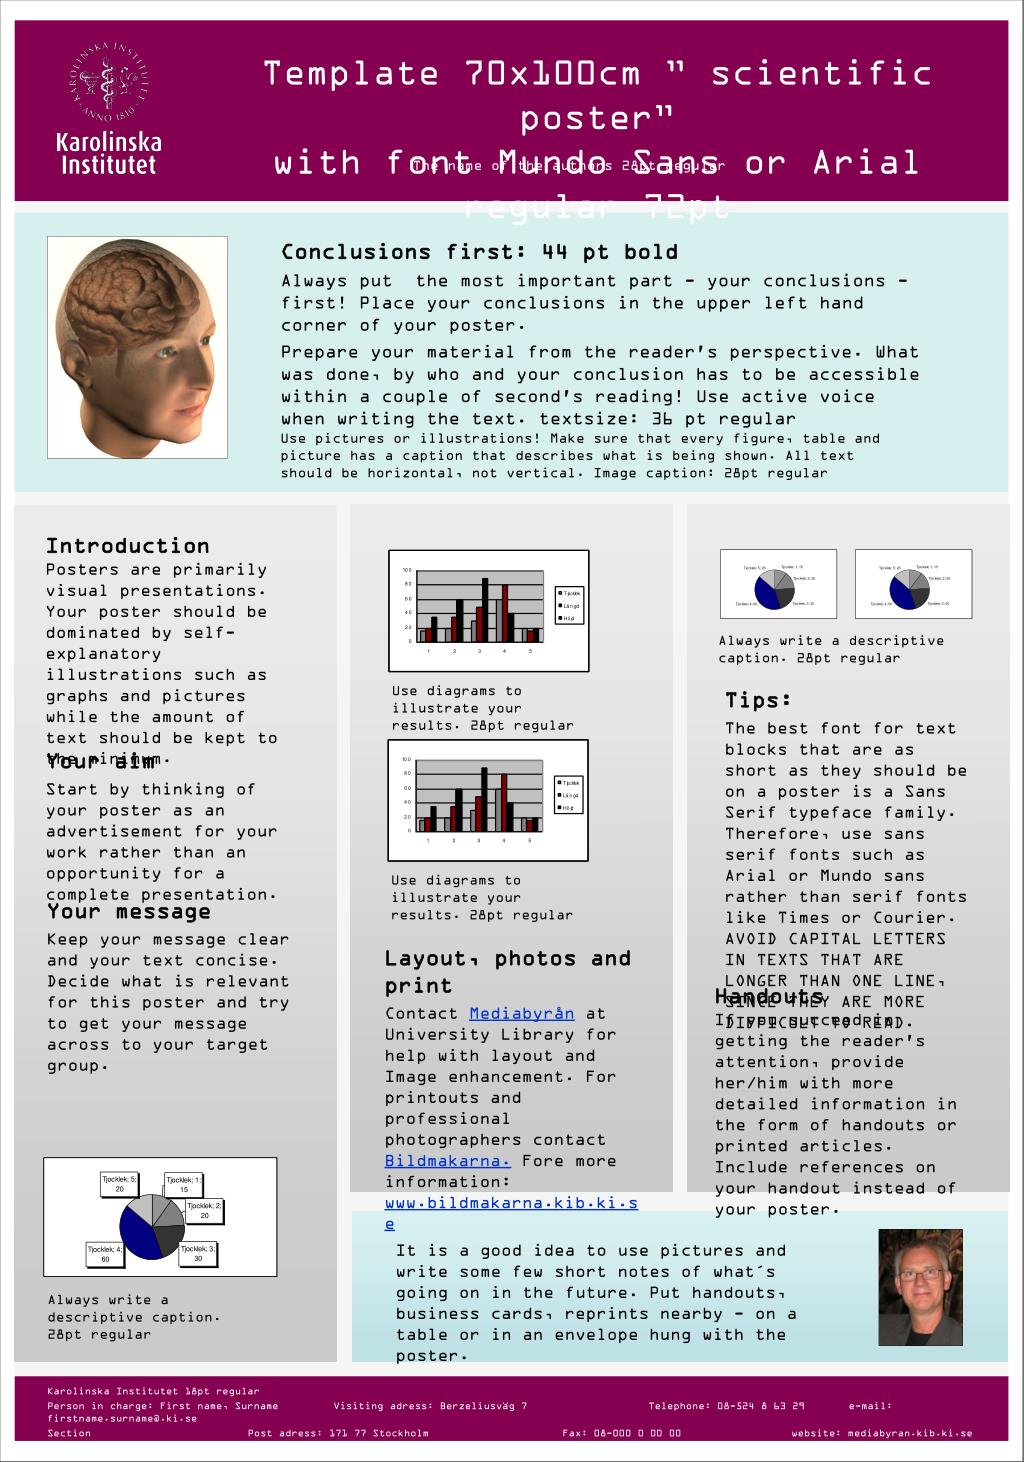 Research Poster Presentation Template from image3.slideserve.com